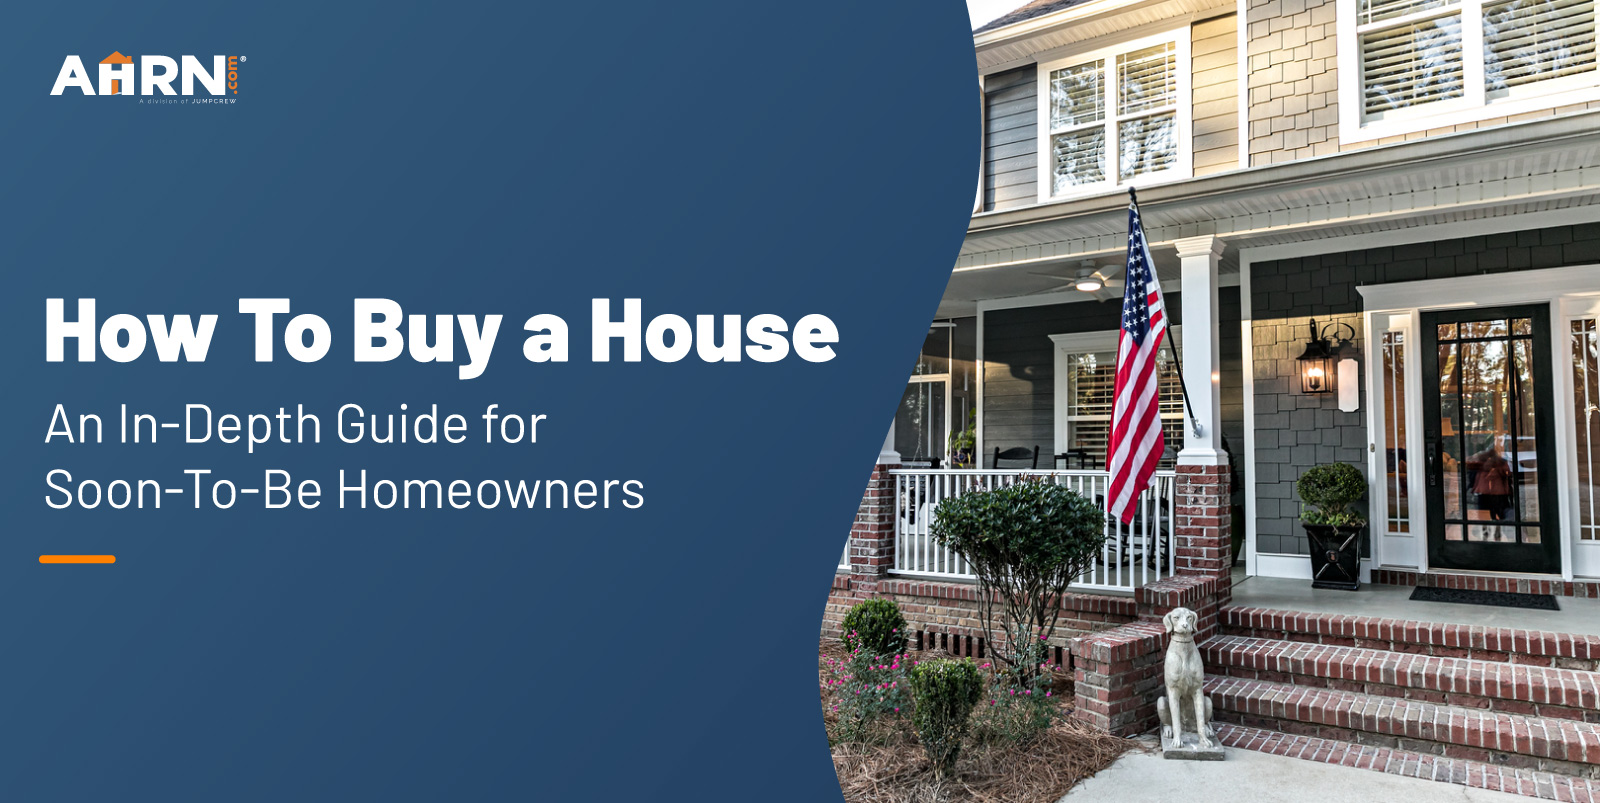 How To Buy a House: An In-Depth Guide for Soon-To-Be Homeowners